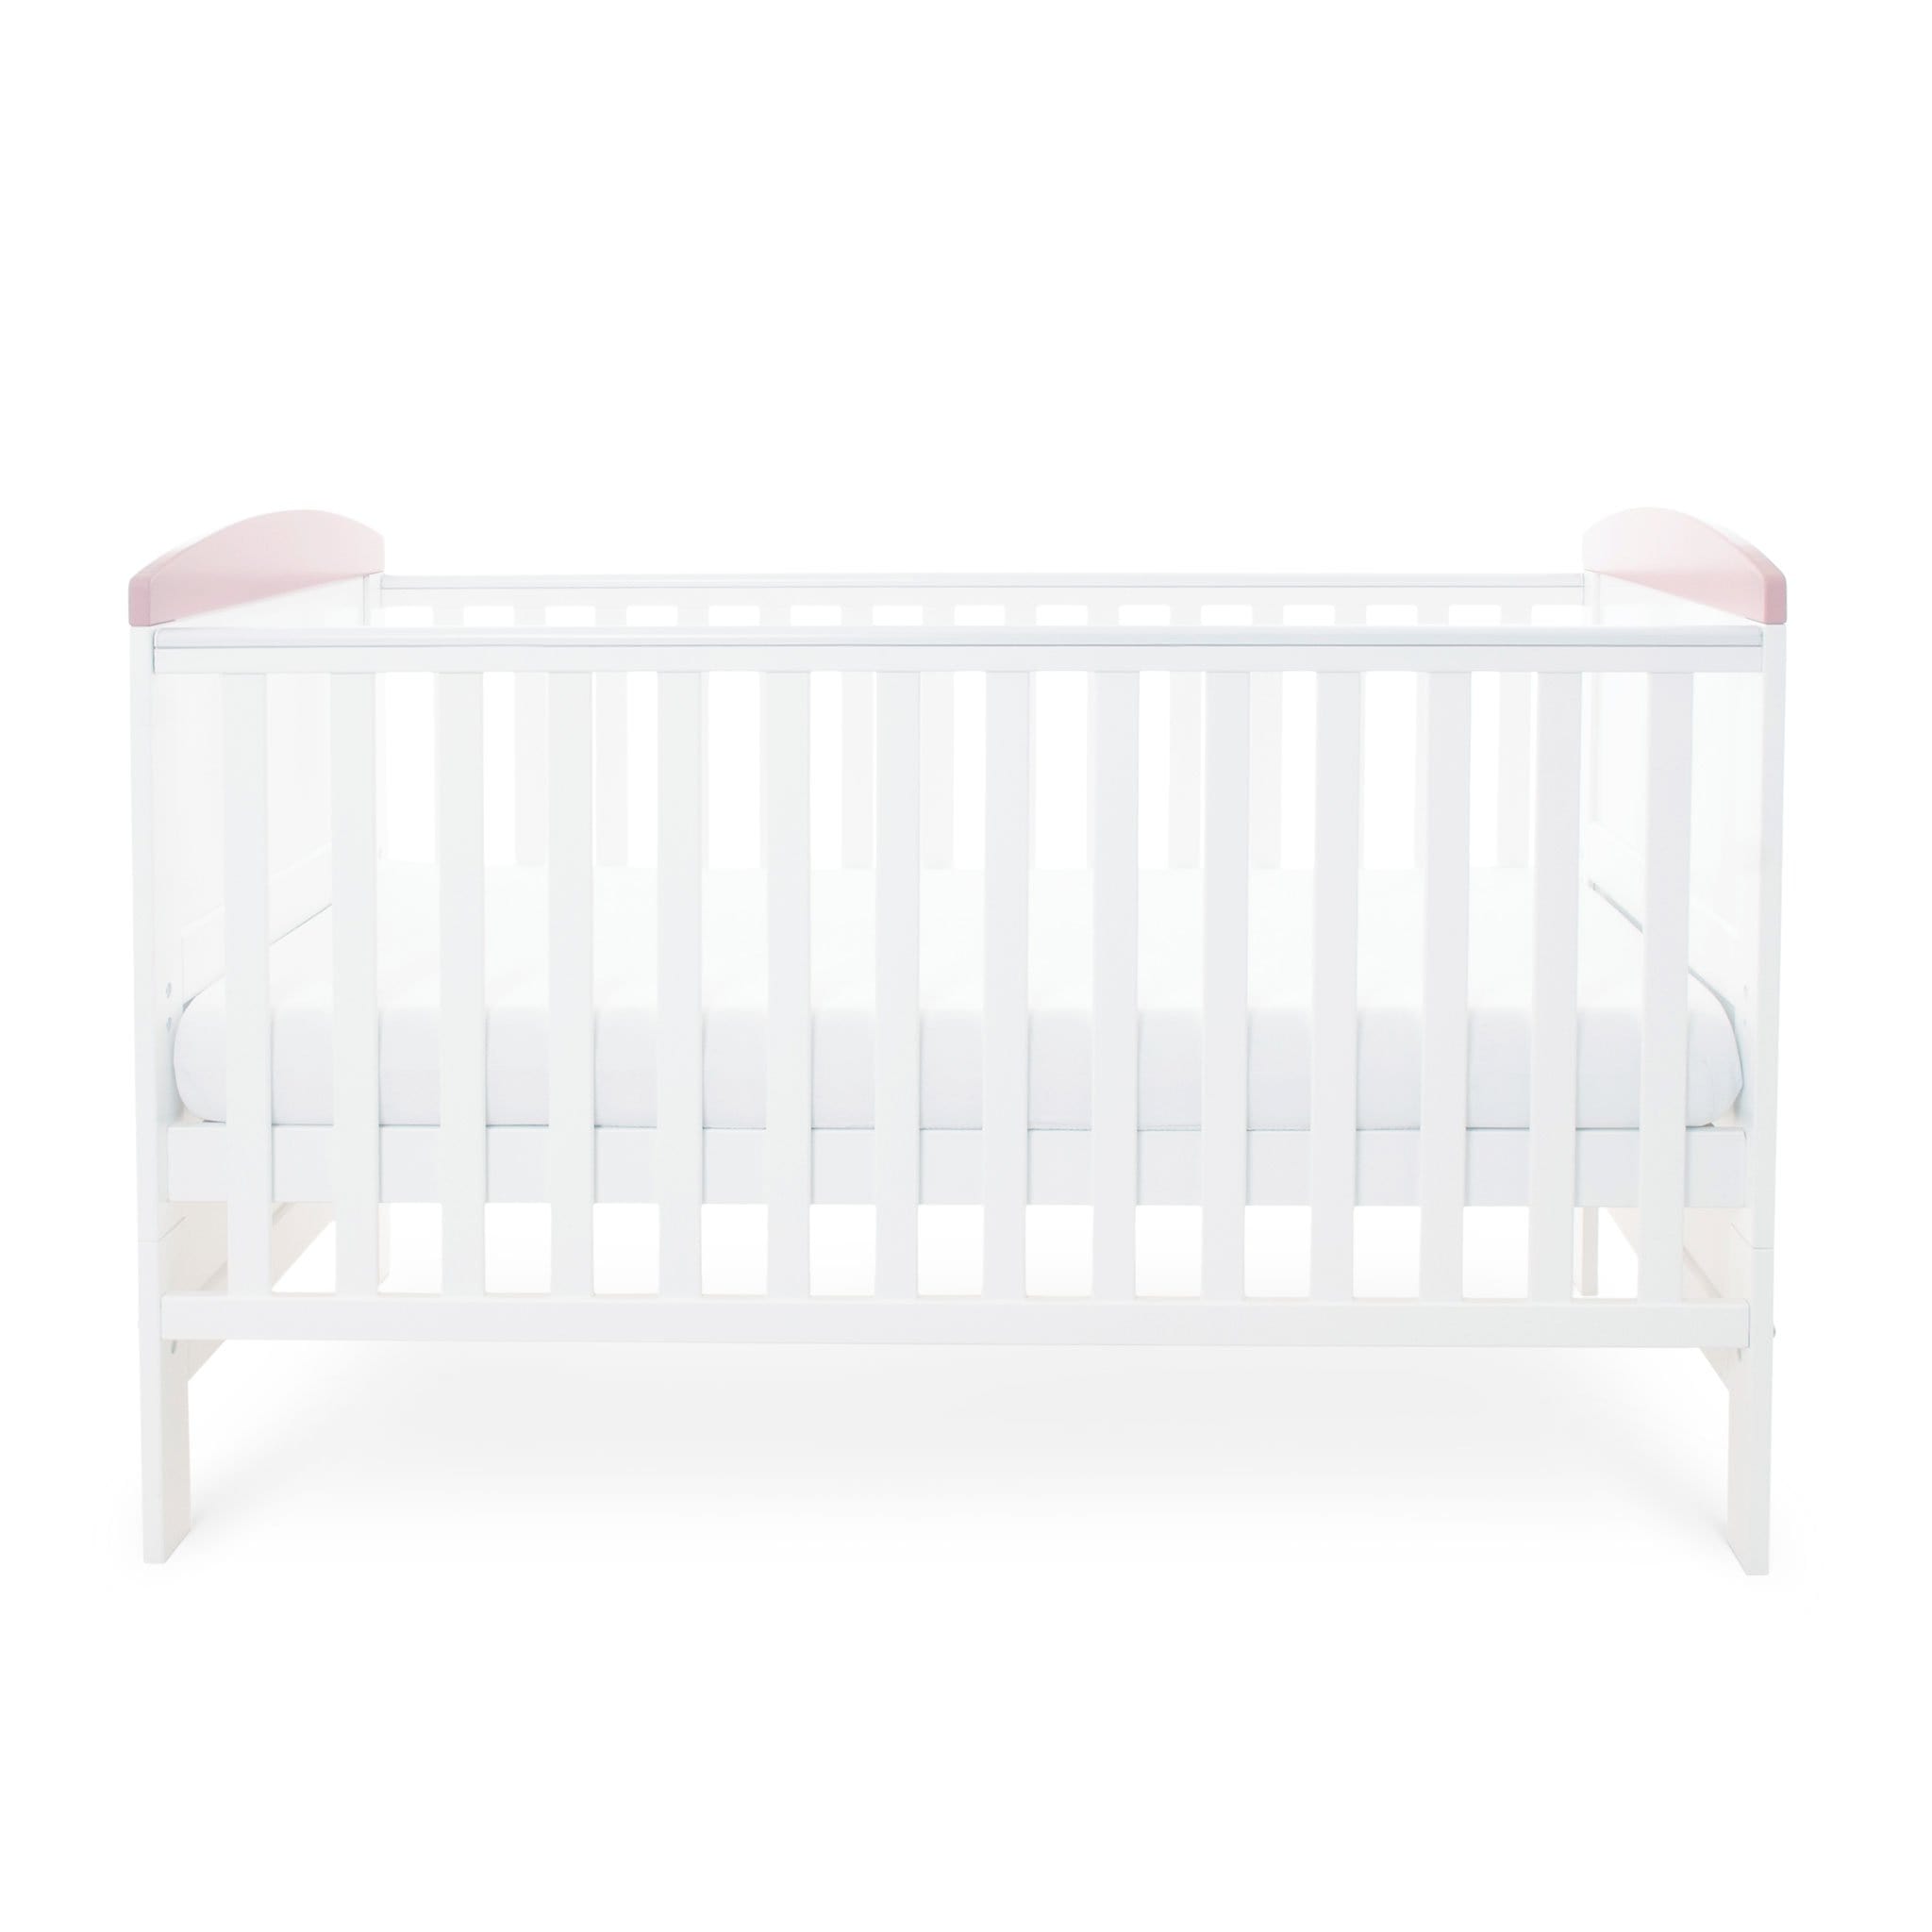 Ickle Bubba Coleby Style Cot Bed Elephant Love Pink Cot Beds